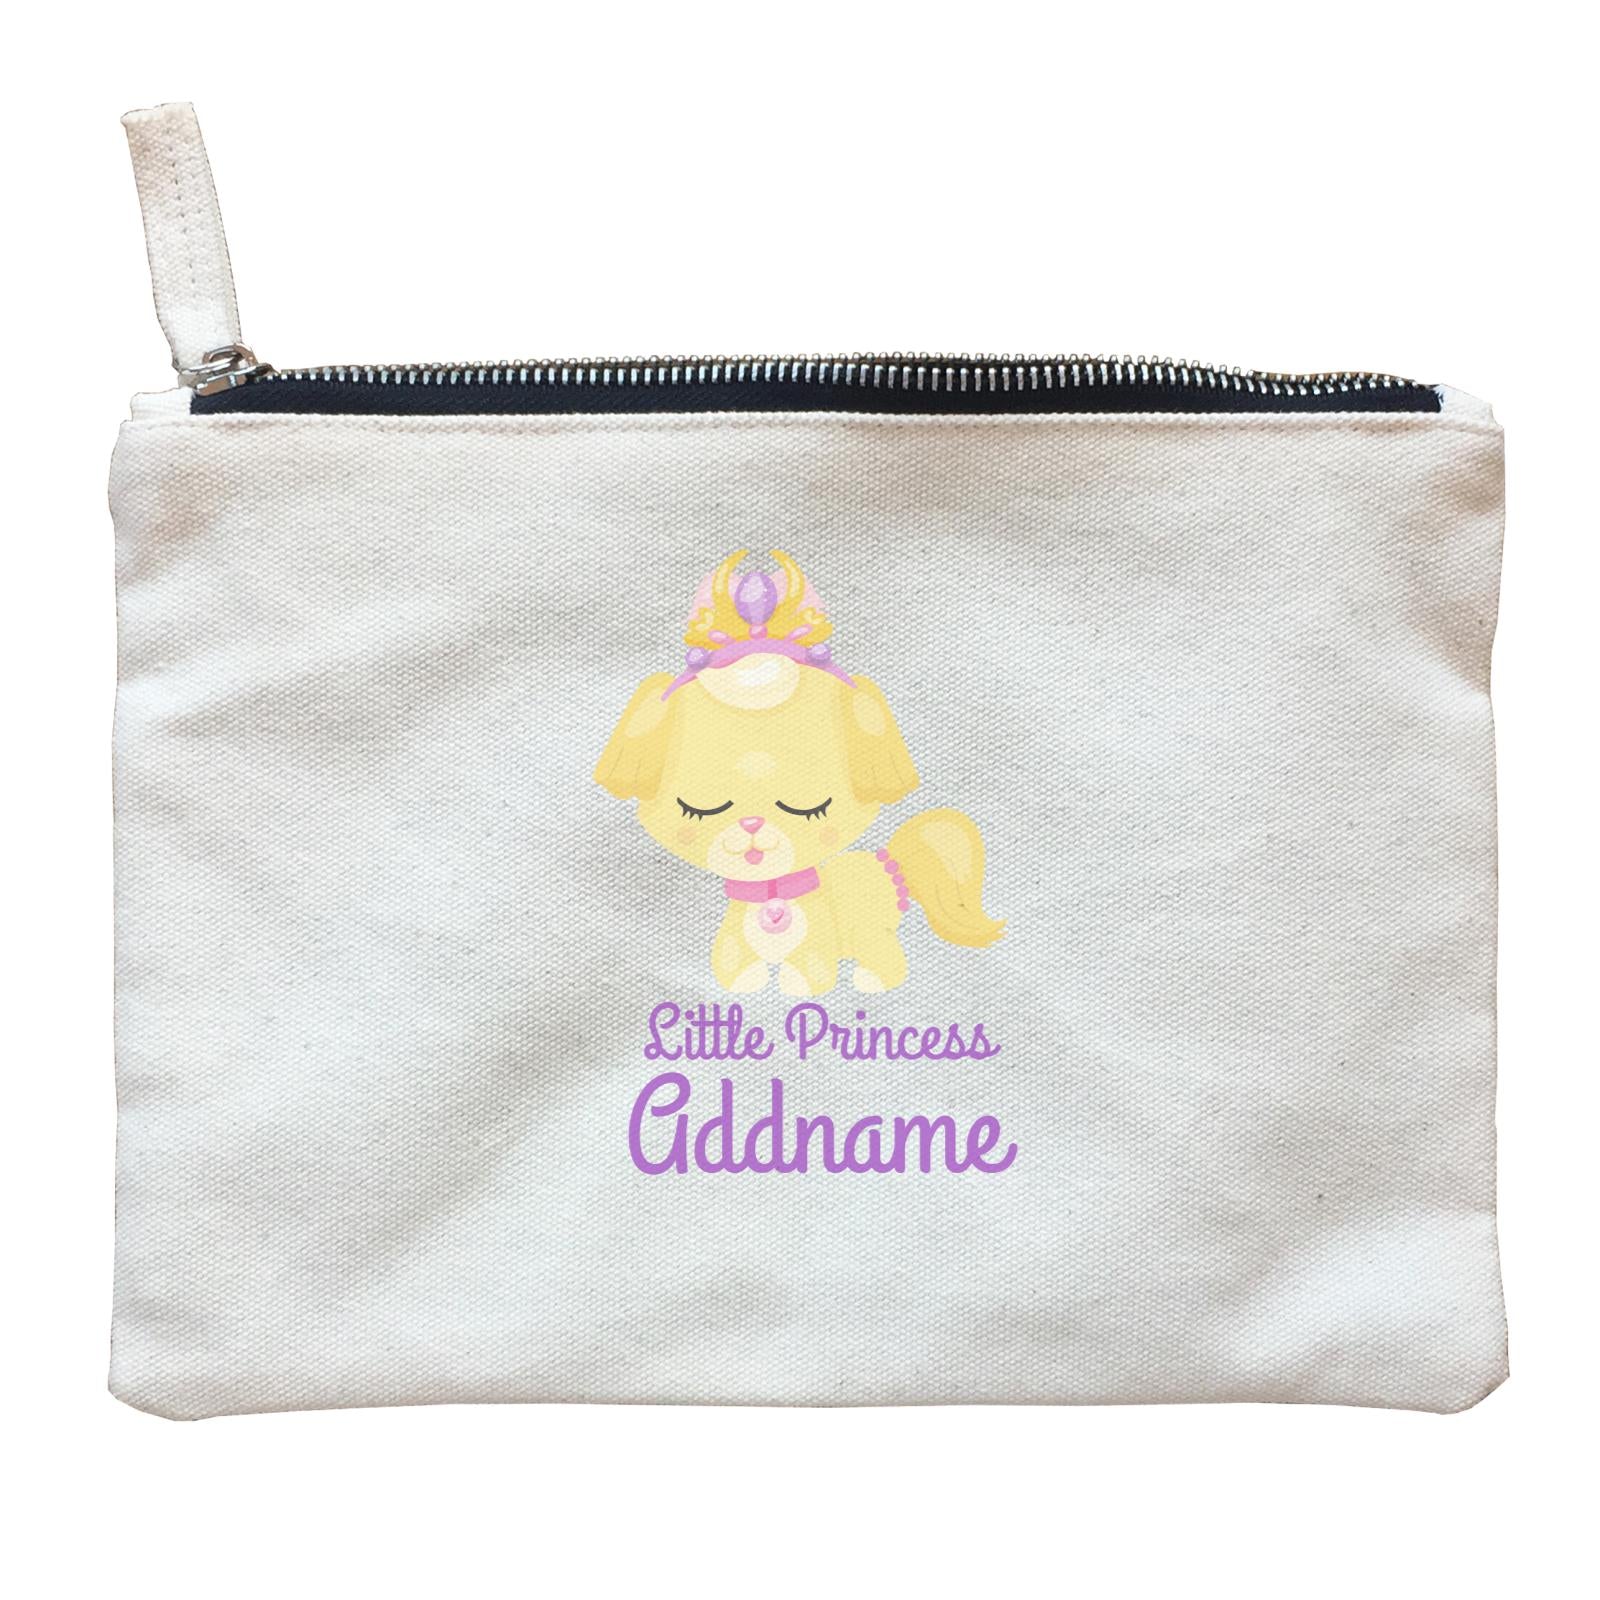 Little Princess Pets Yellow Dog with Crown Addname Zipper Pouch